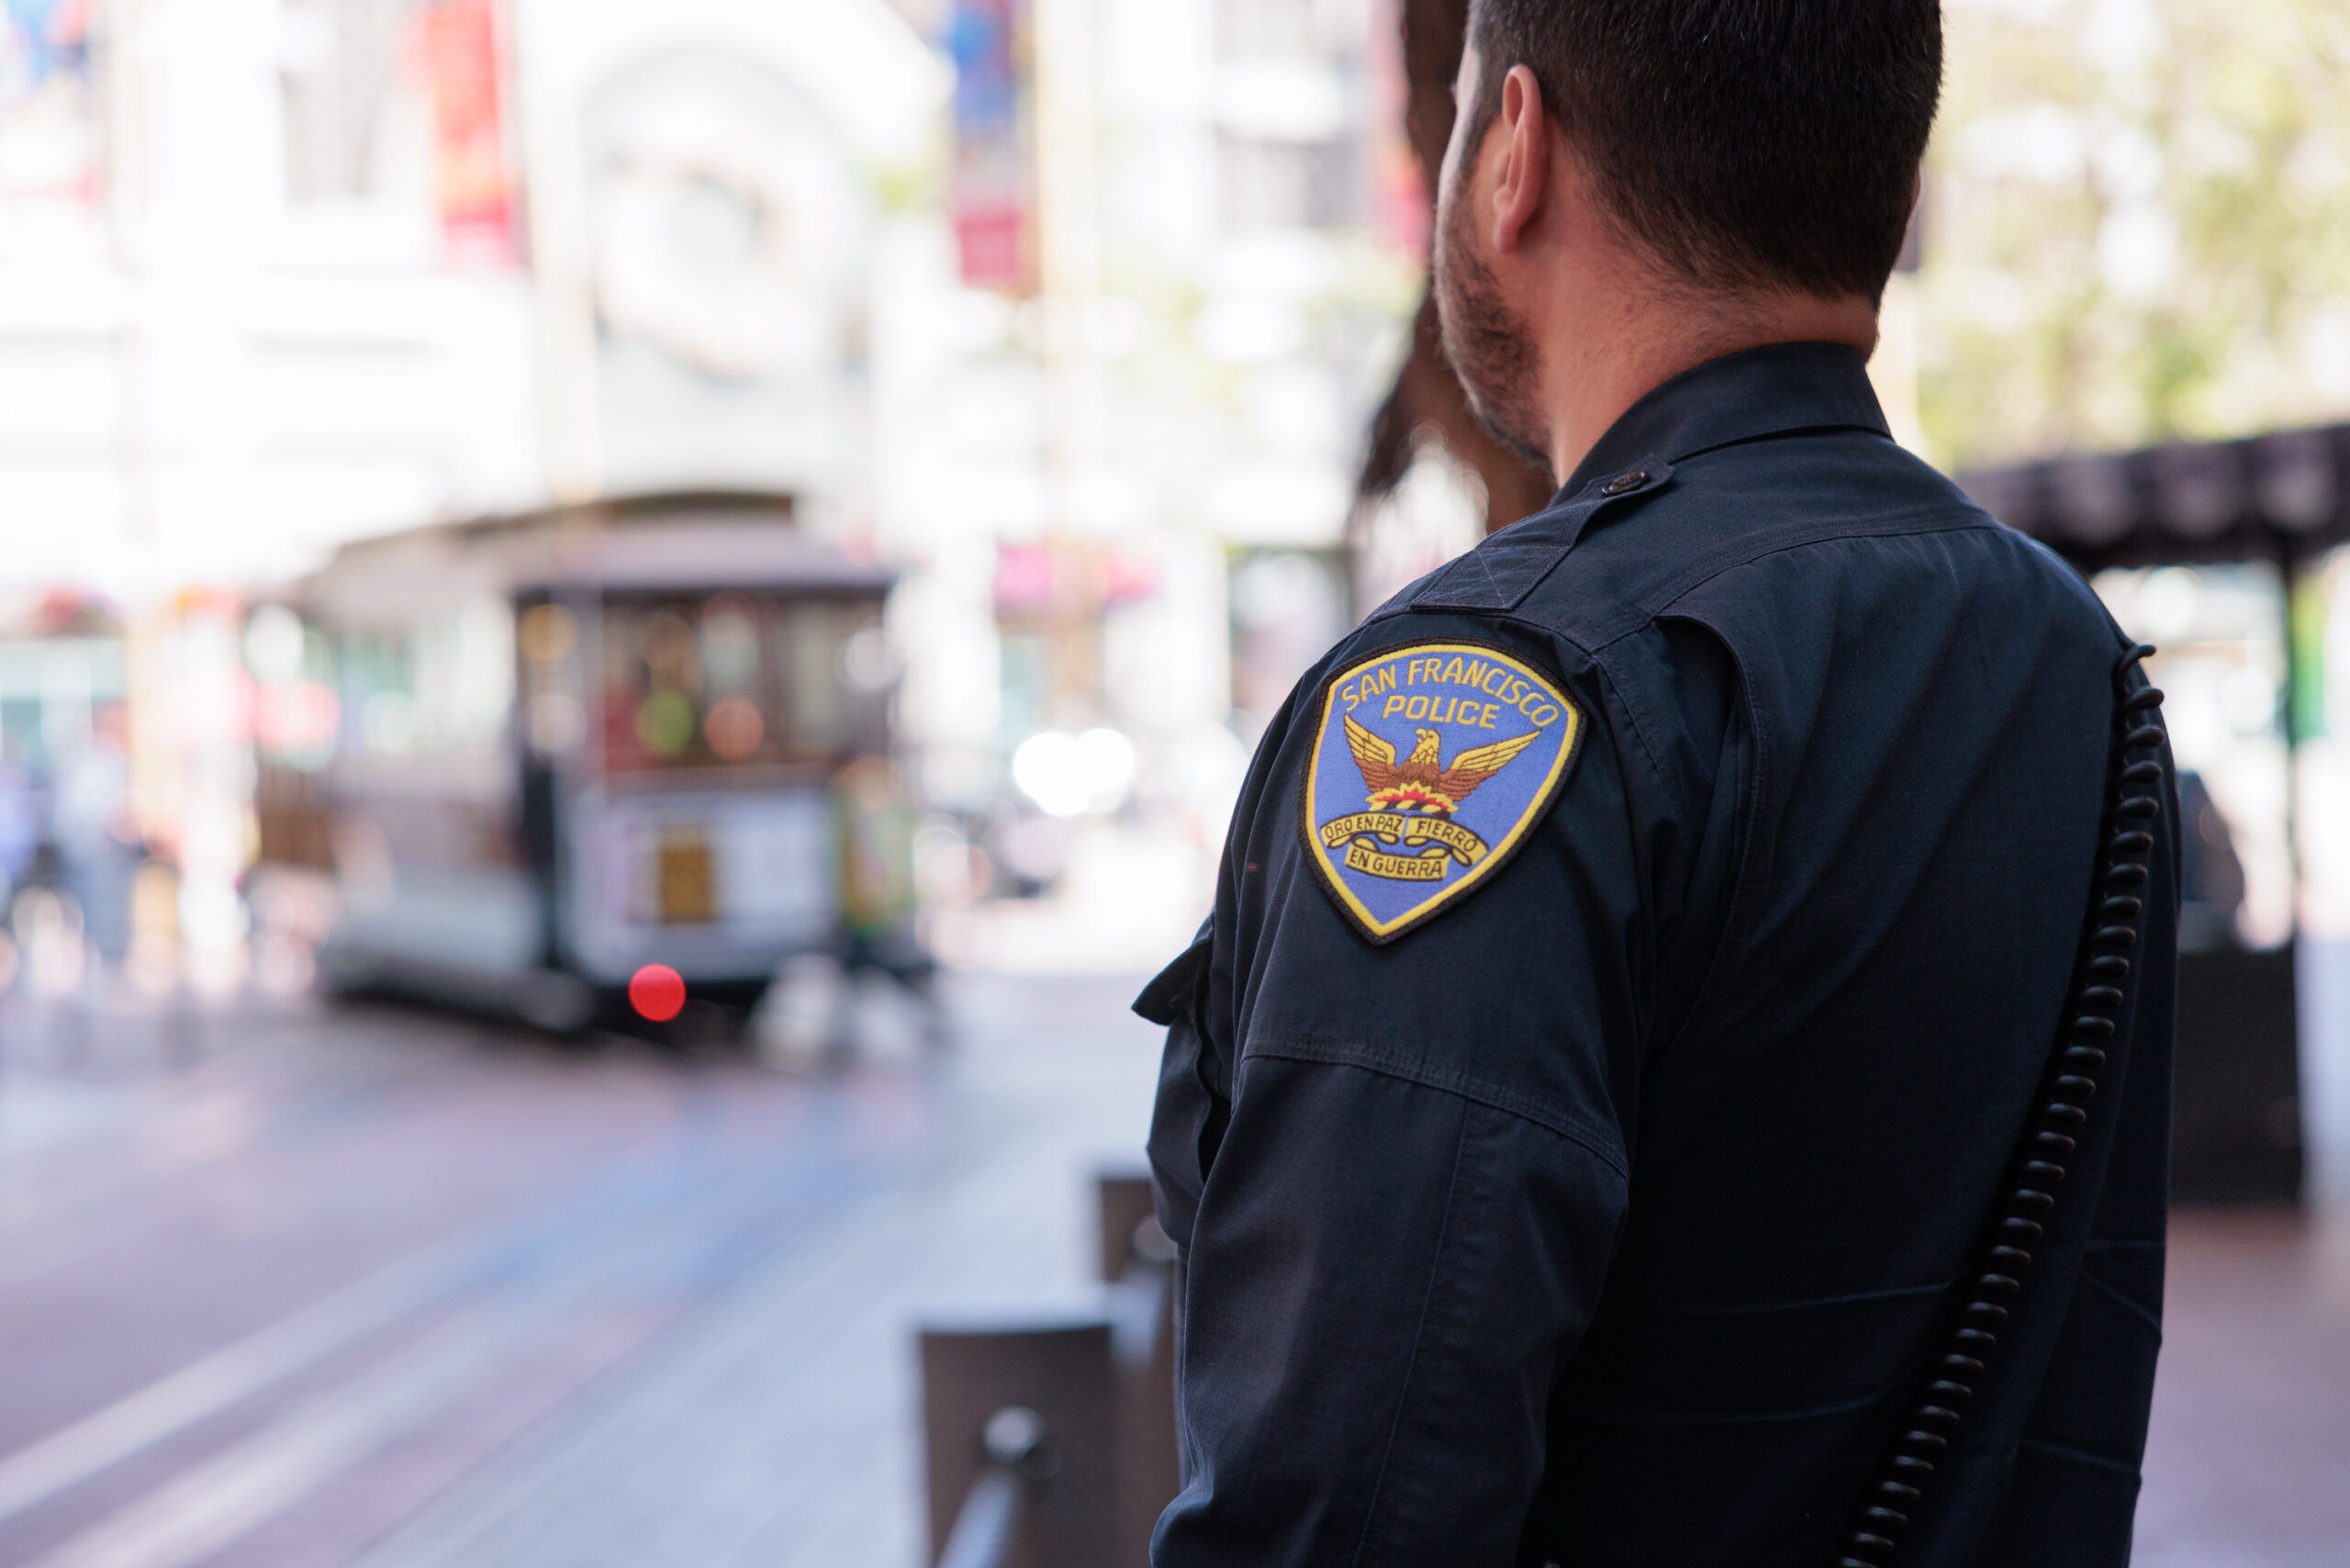 Downtown San Francisco Triple Stabbing: Suspect Detained by Police